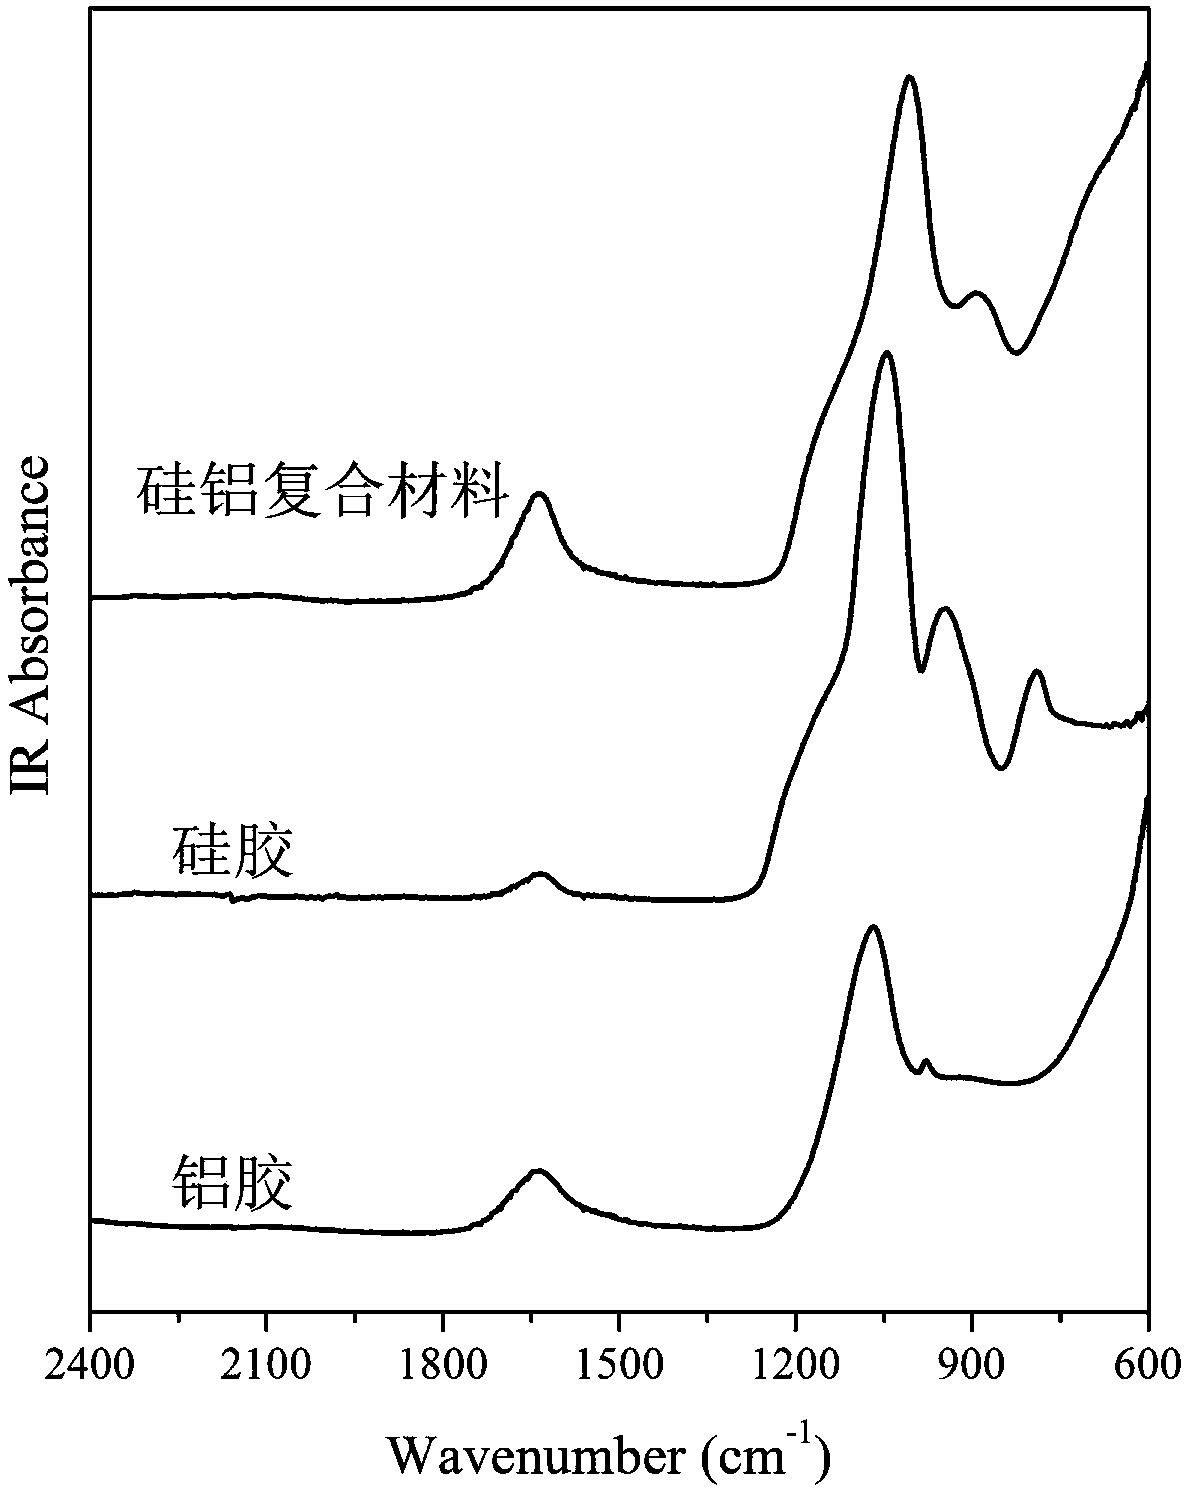 Stabilizing method of arsenic-containing waste residues